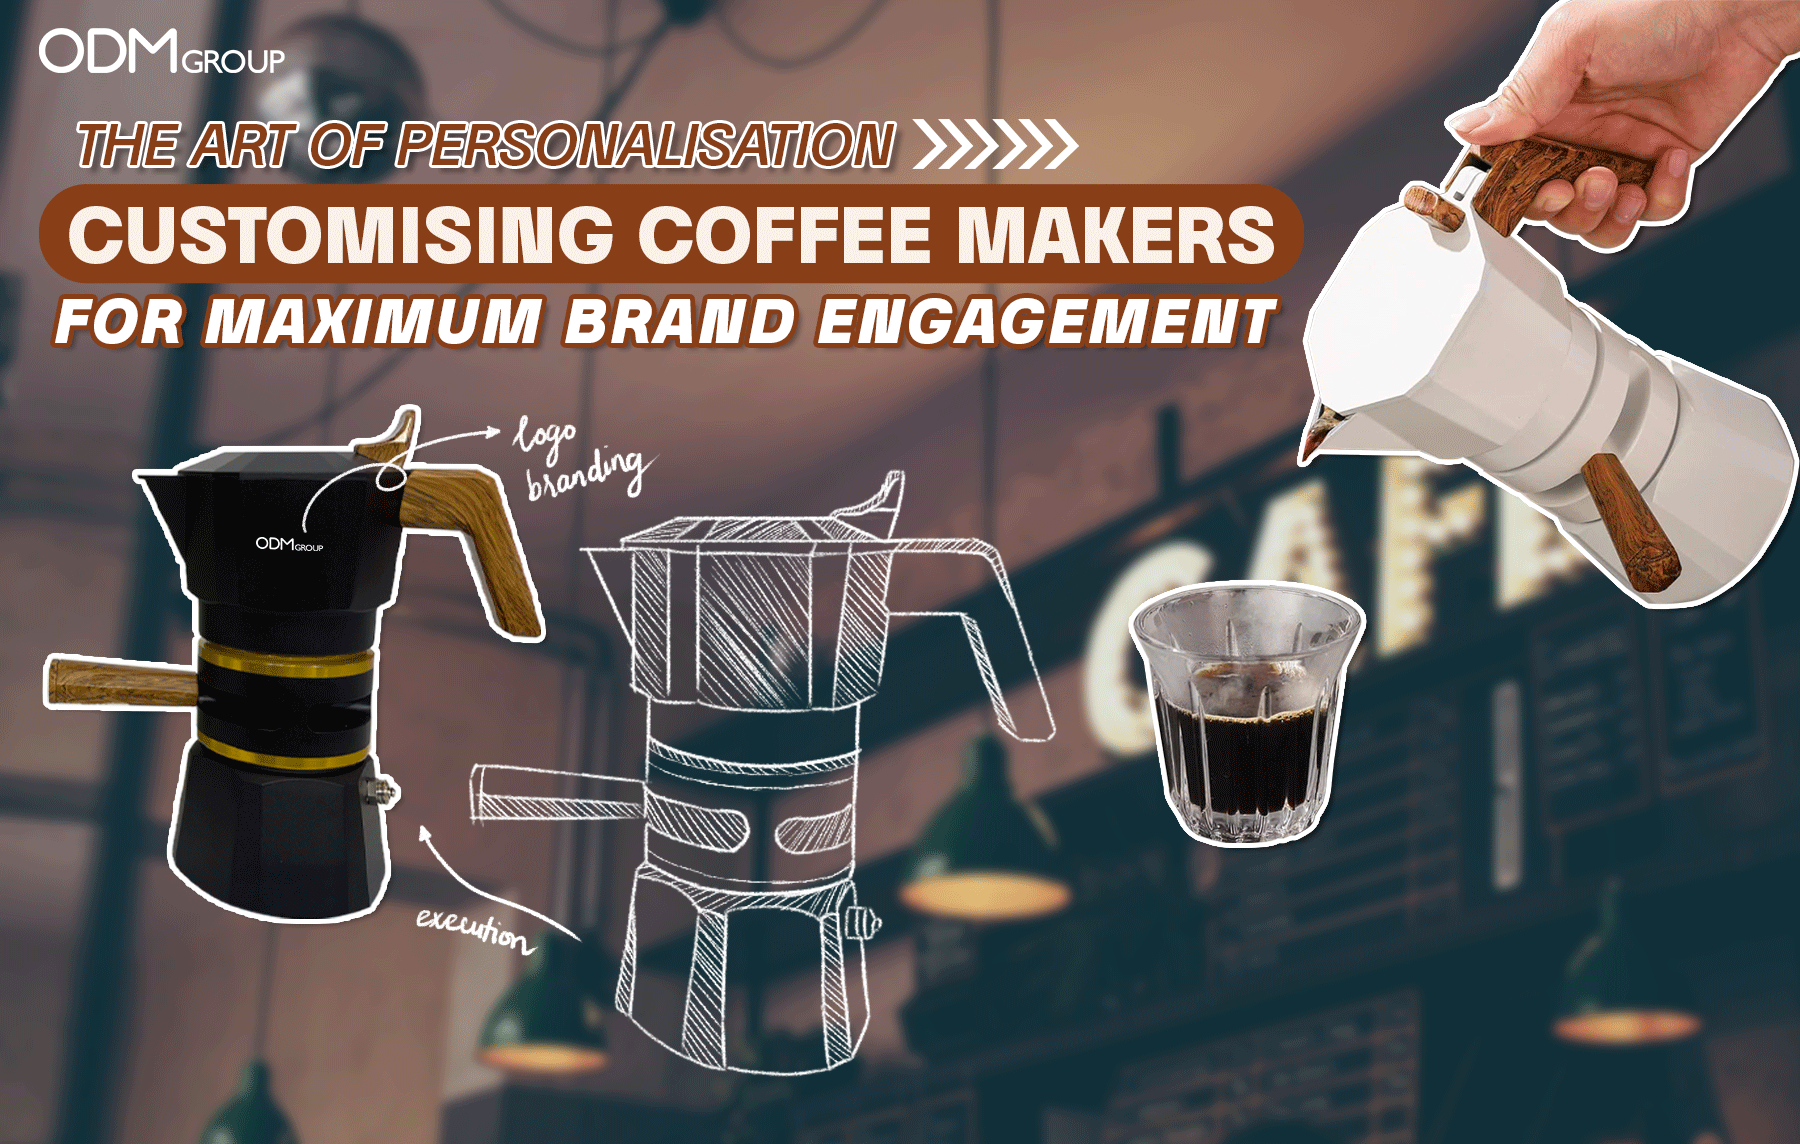 Customizable coffee makers by ODM Group.